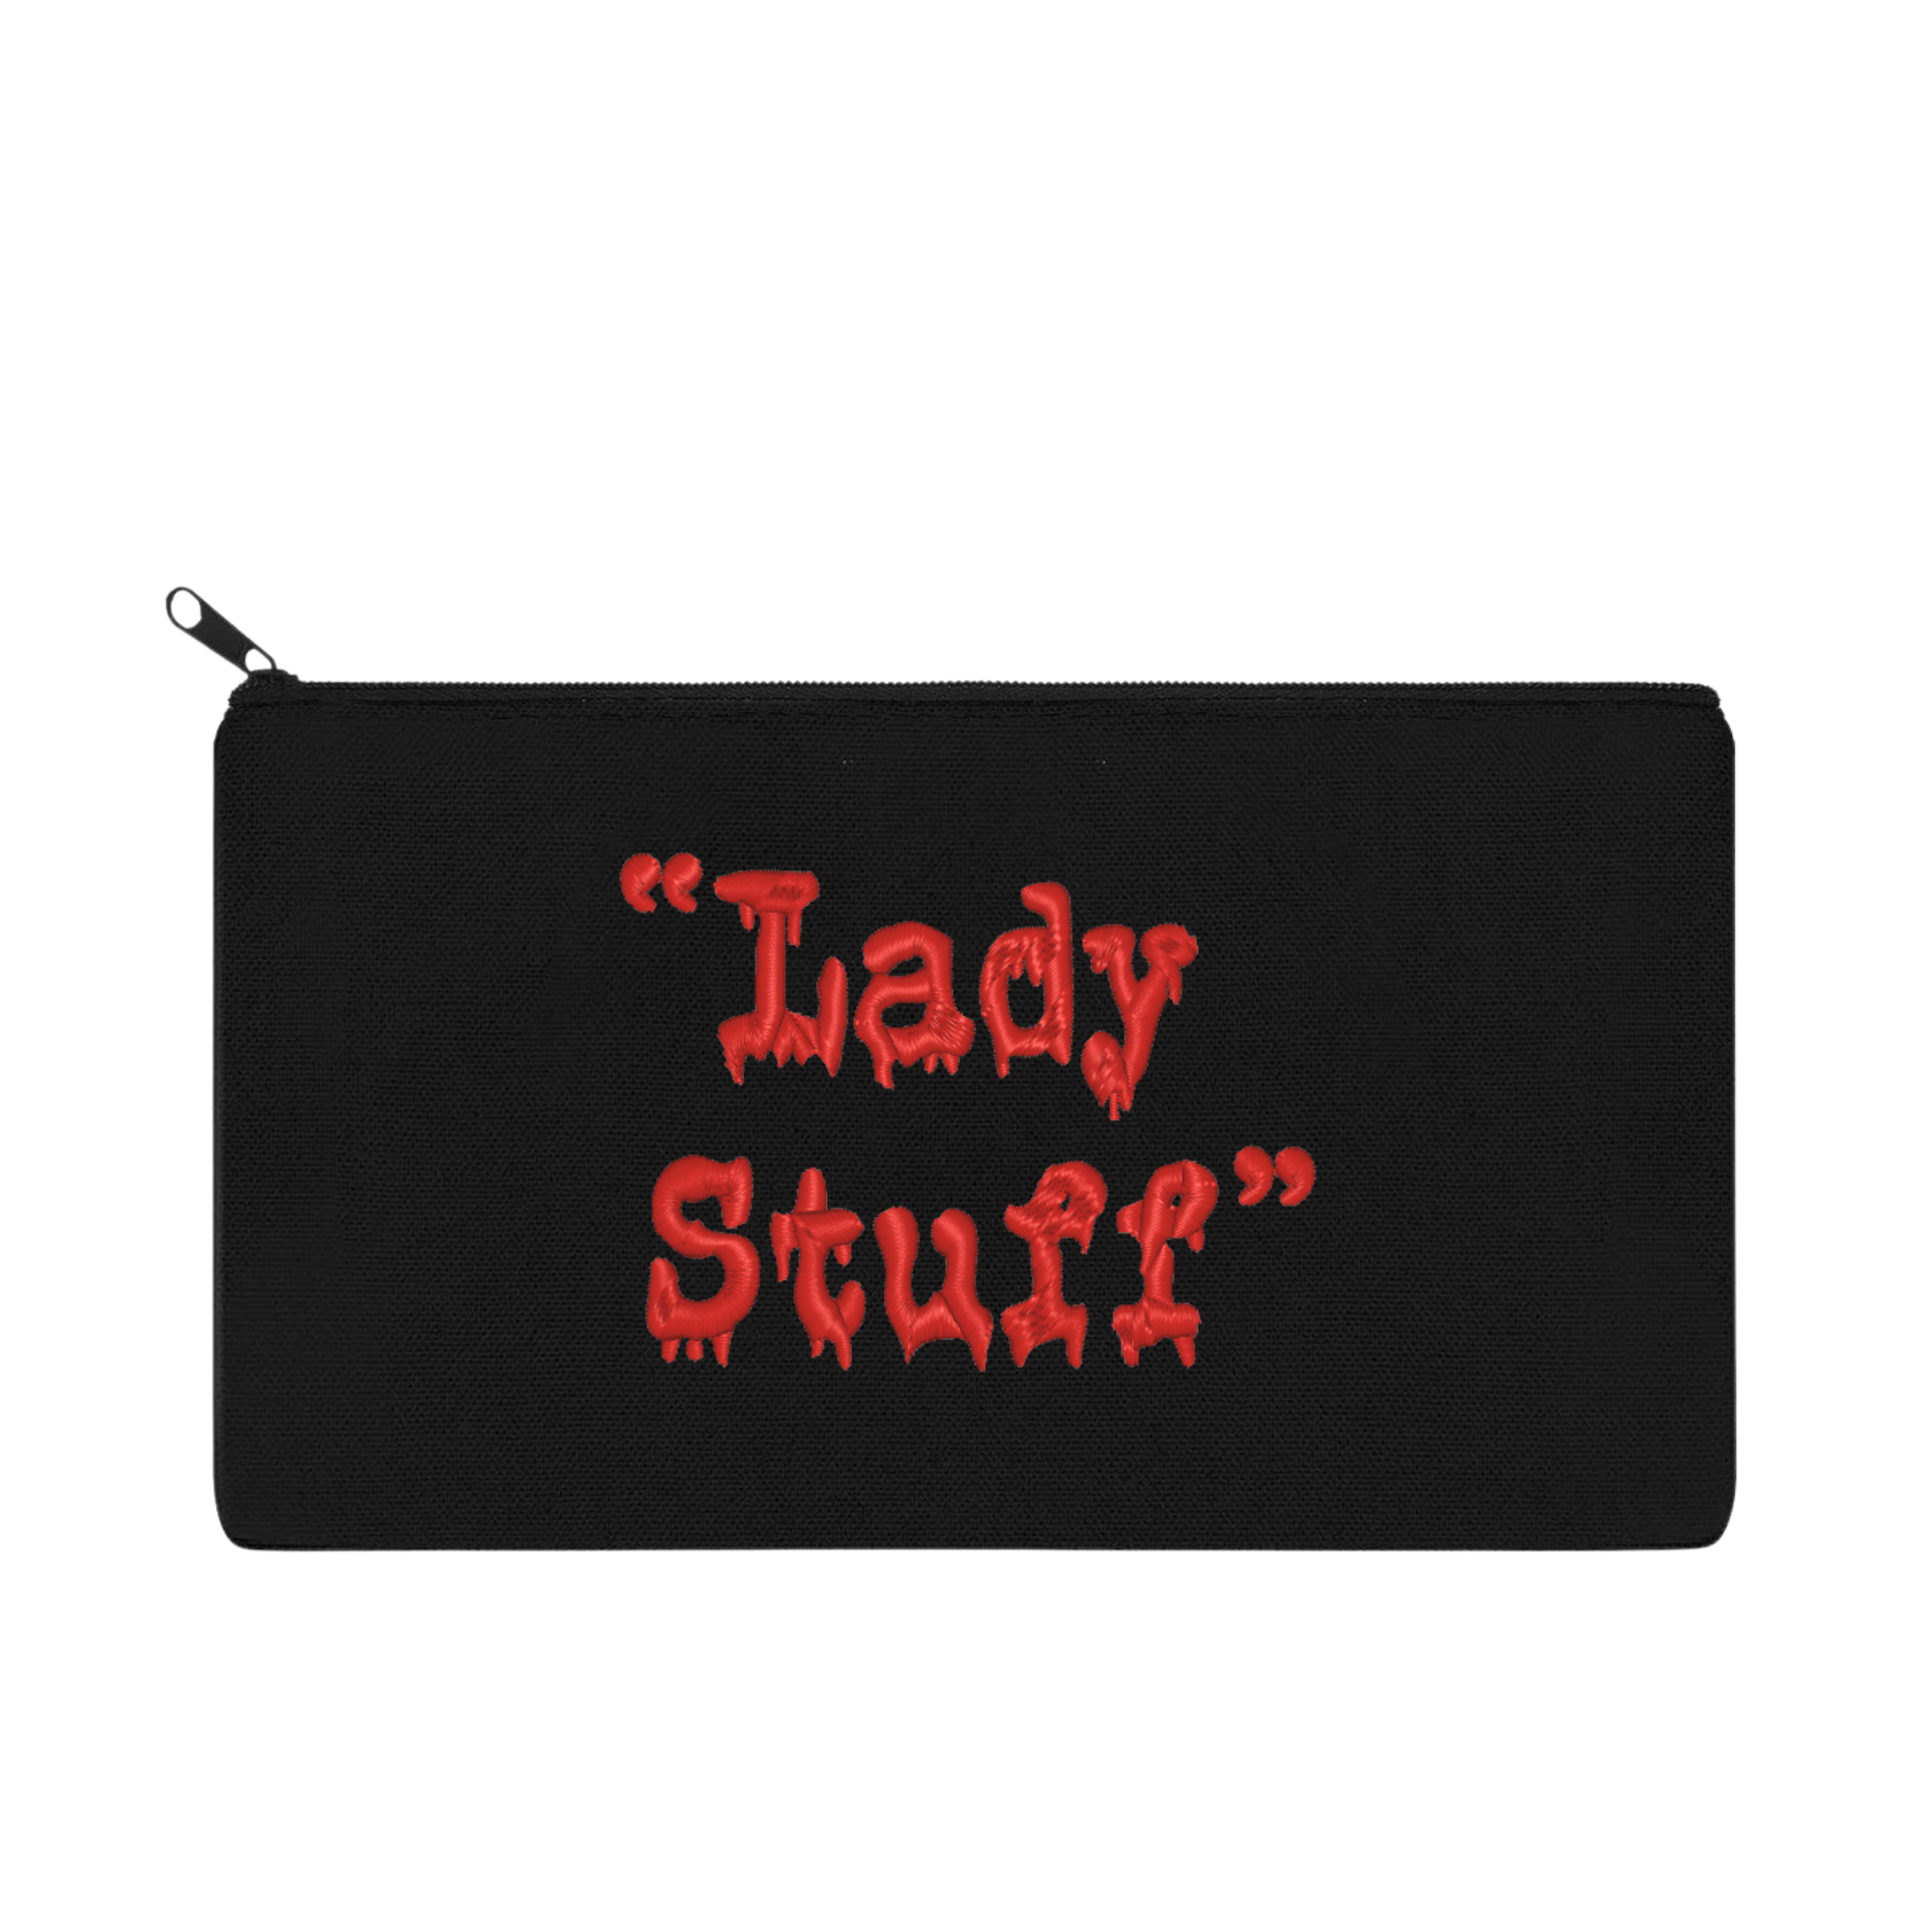 "Lady Stuff" Black and Red Embroidered Multipurpose Zipper Pouch Bag